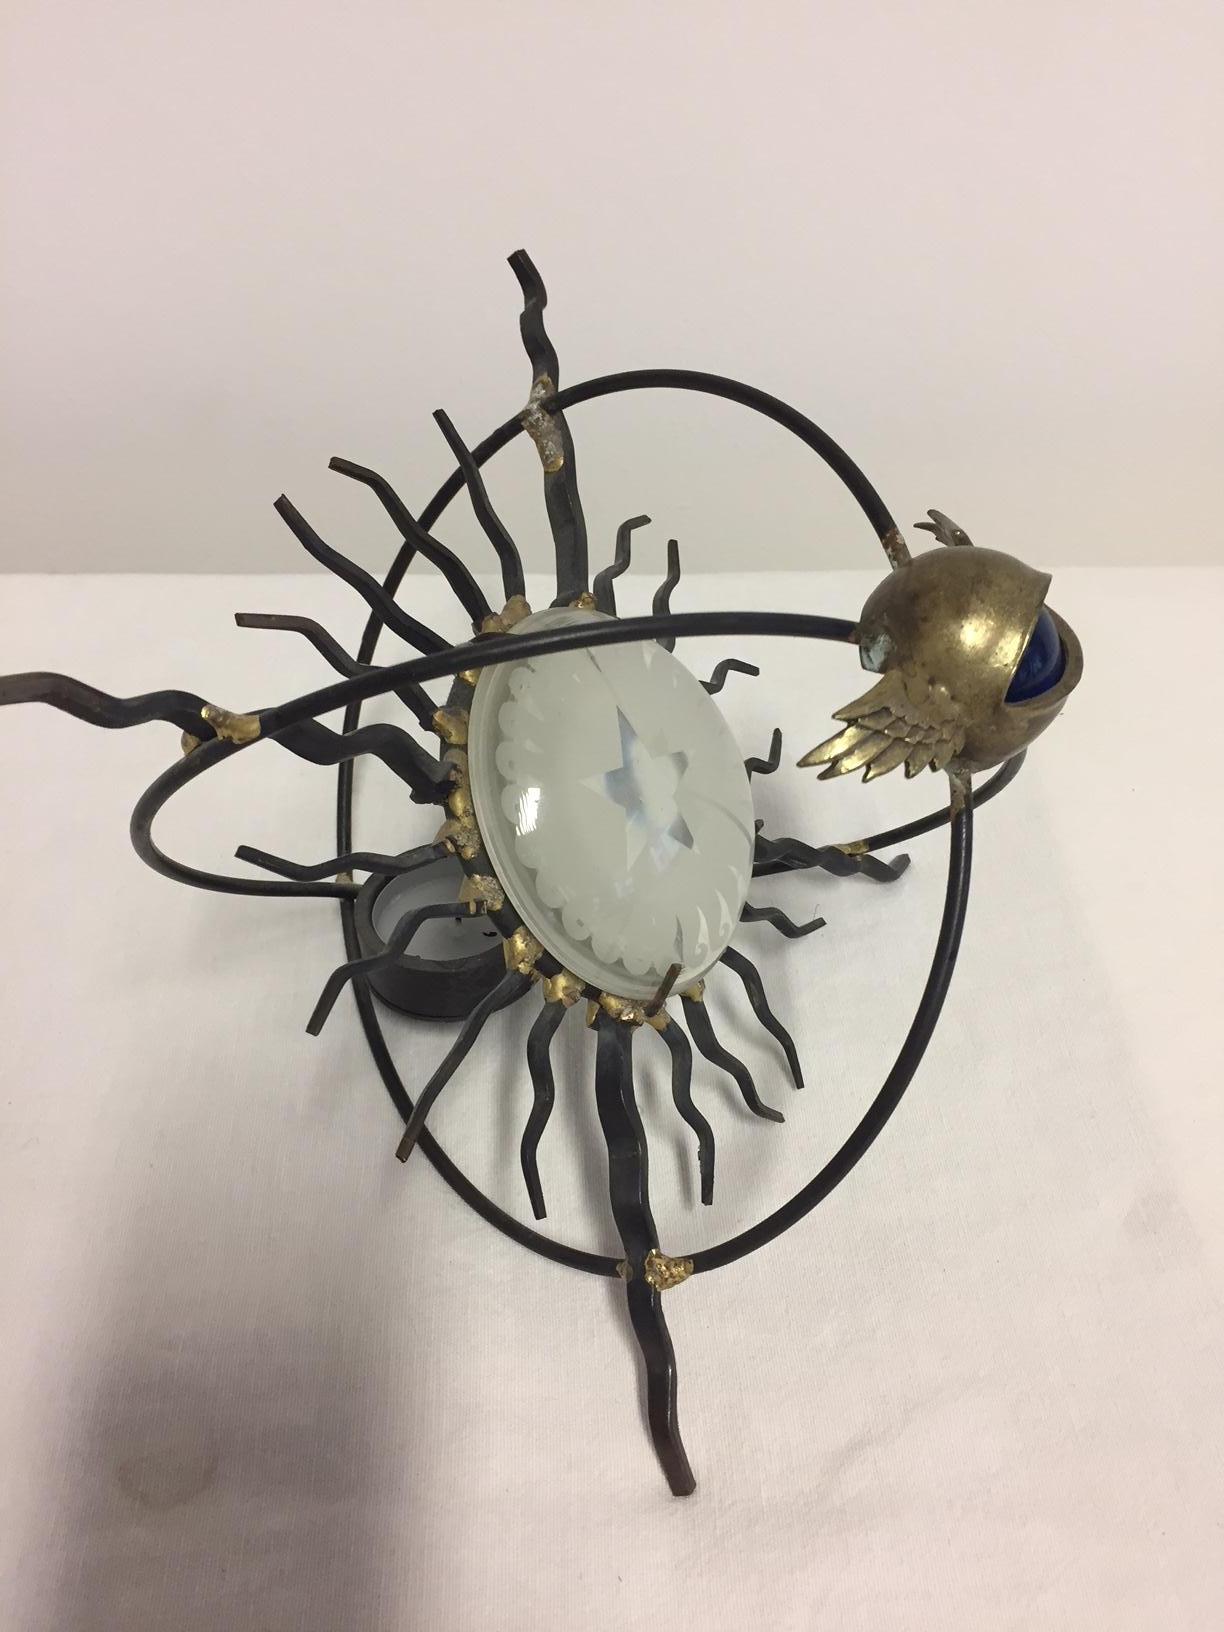 Decorative candle light holder by Marc Brazier Jones, with engraved glass and blue glass ball as the centre of the eye, wrought iron and bronze, gilded details, this style is only available as vintage item, no longer produced by the artist.